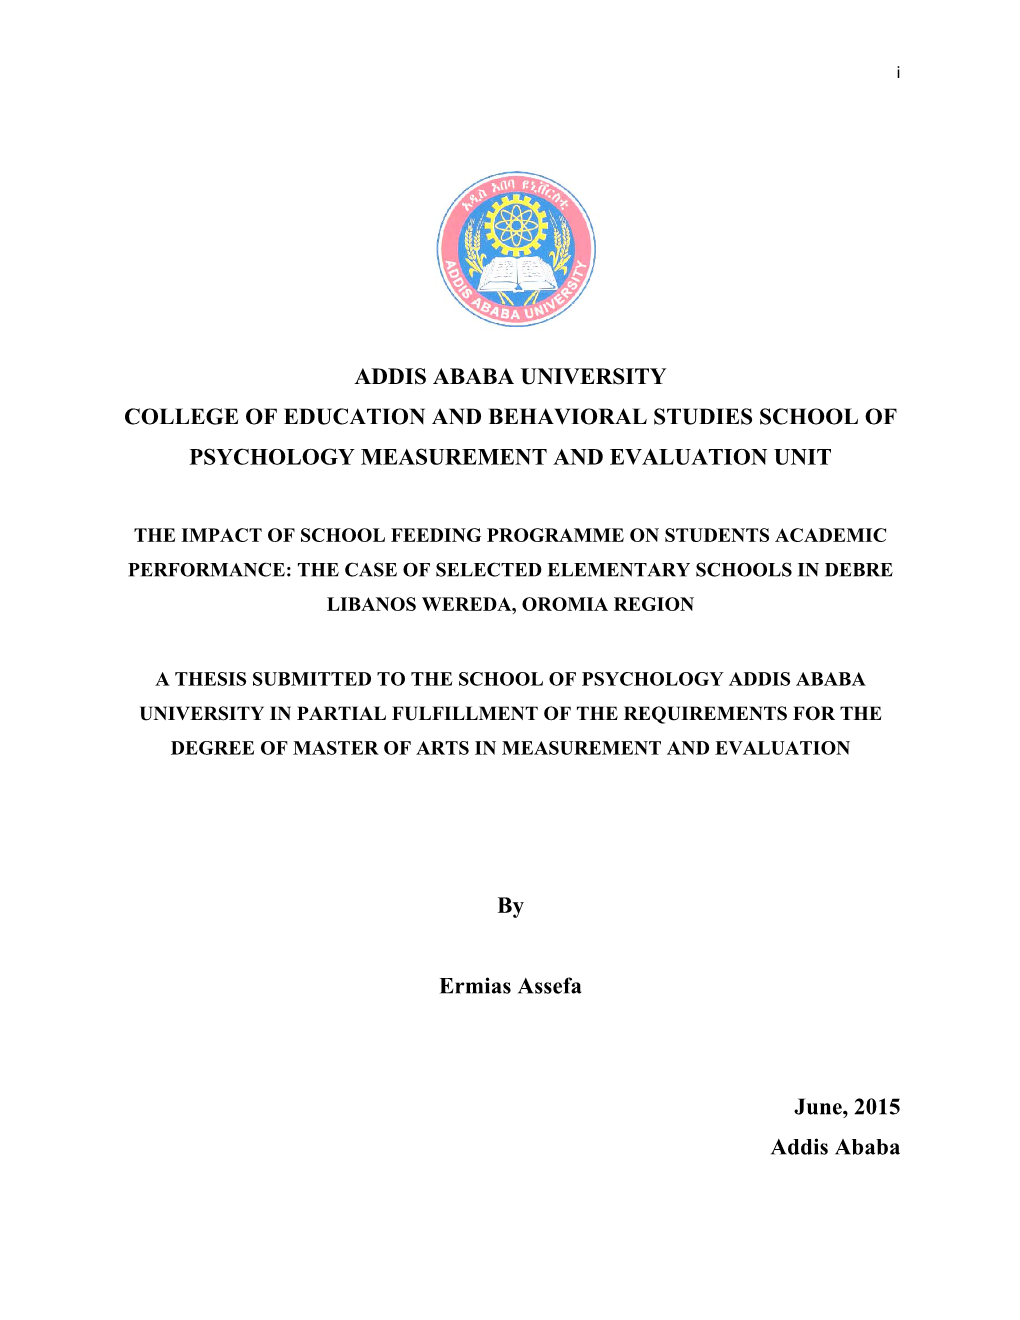 Addis Ababa University College of Education and Behavioral Studies School of Psychology Measurement and Evaluation Unit